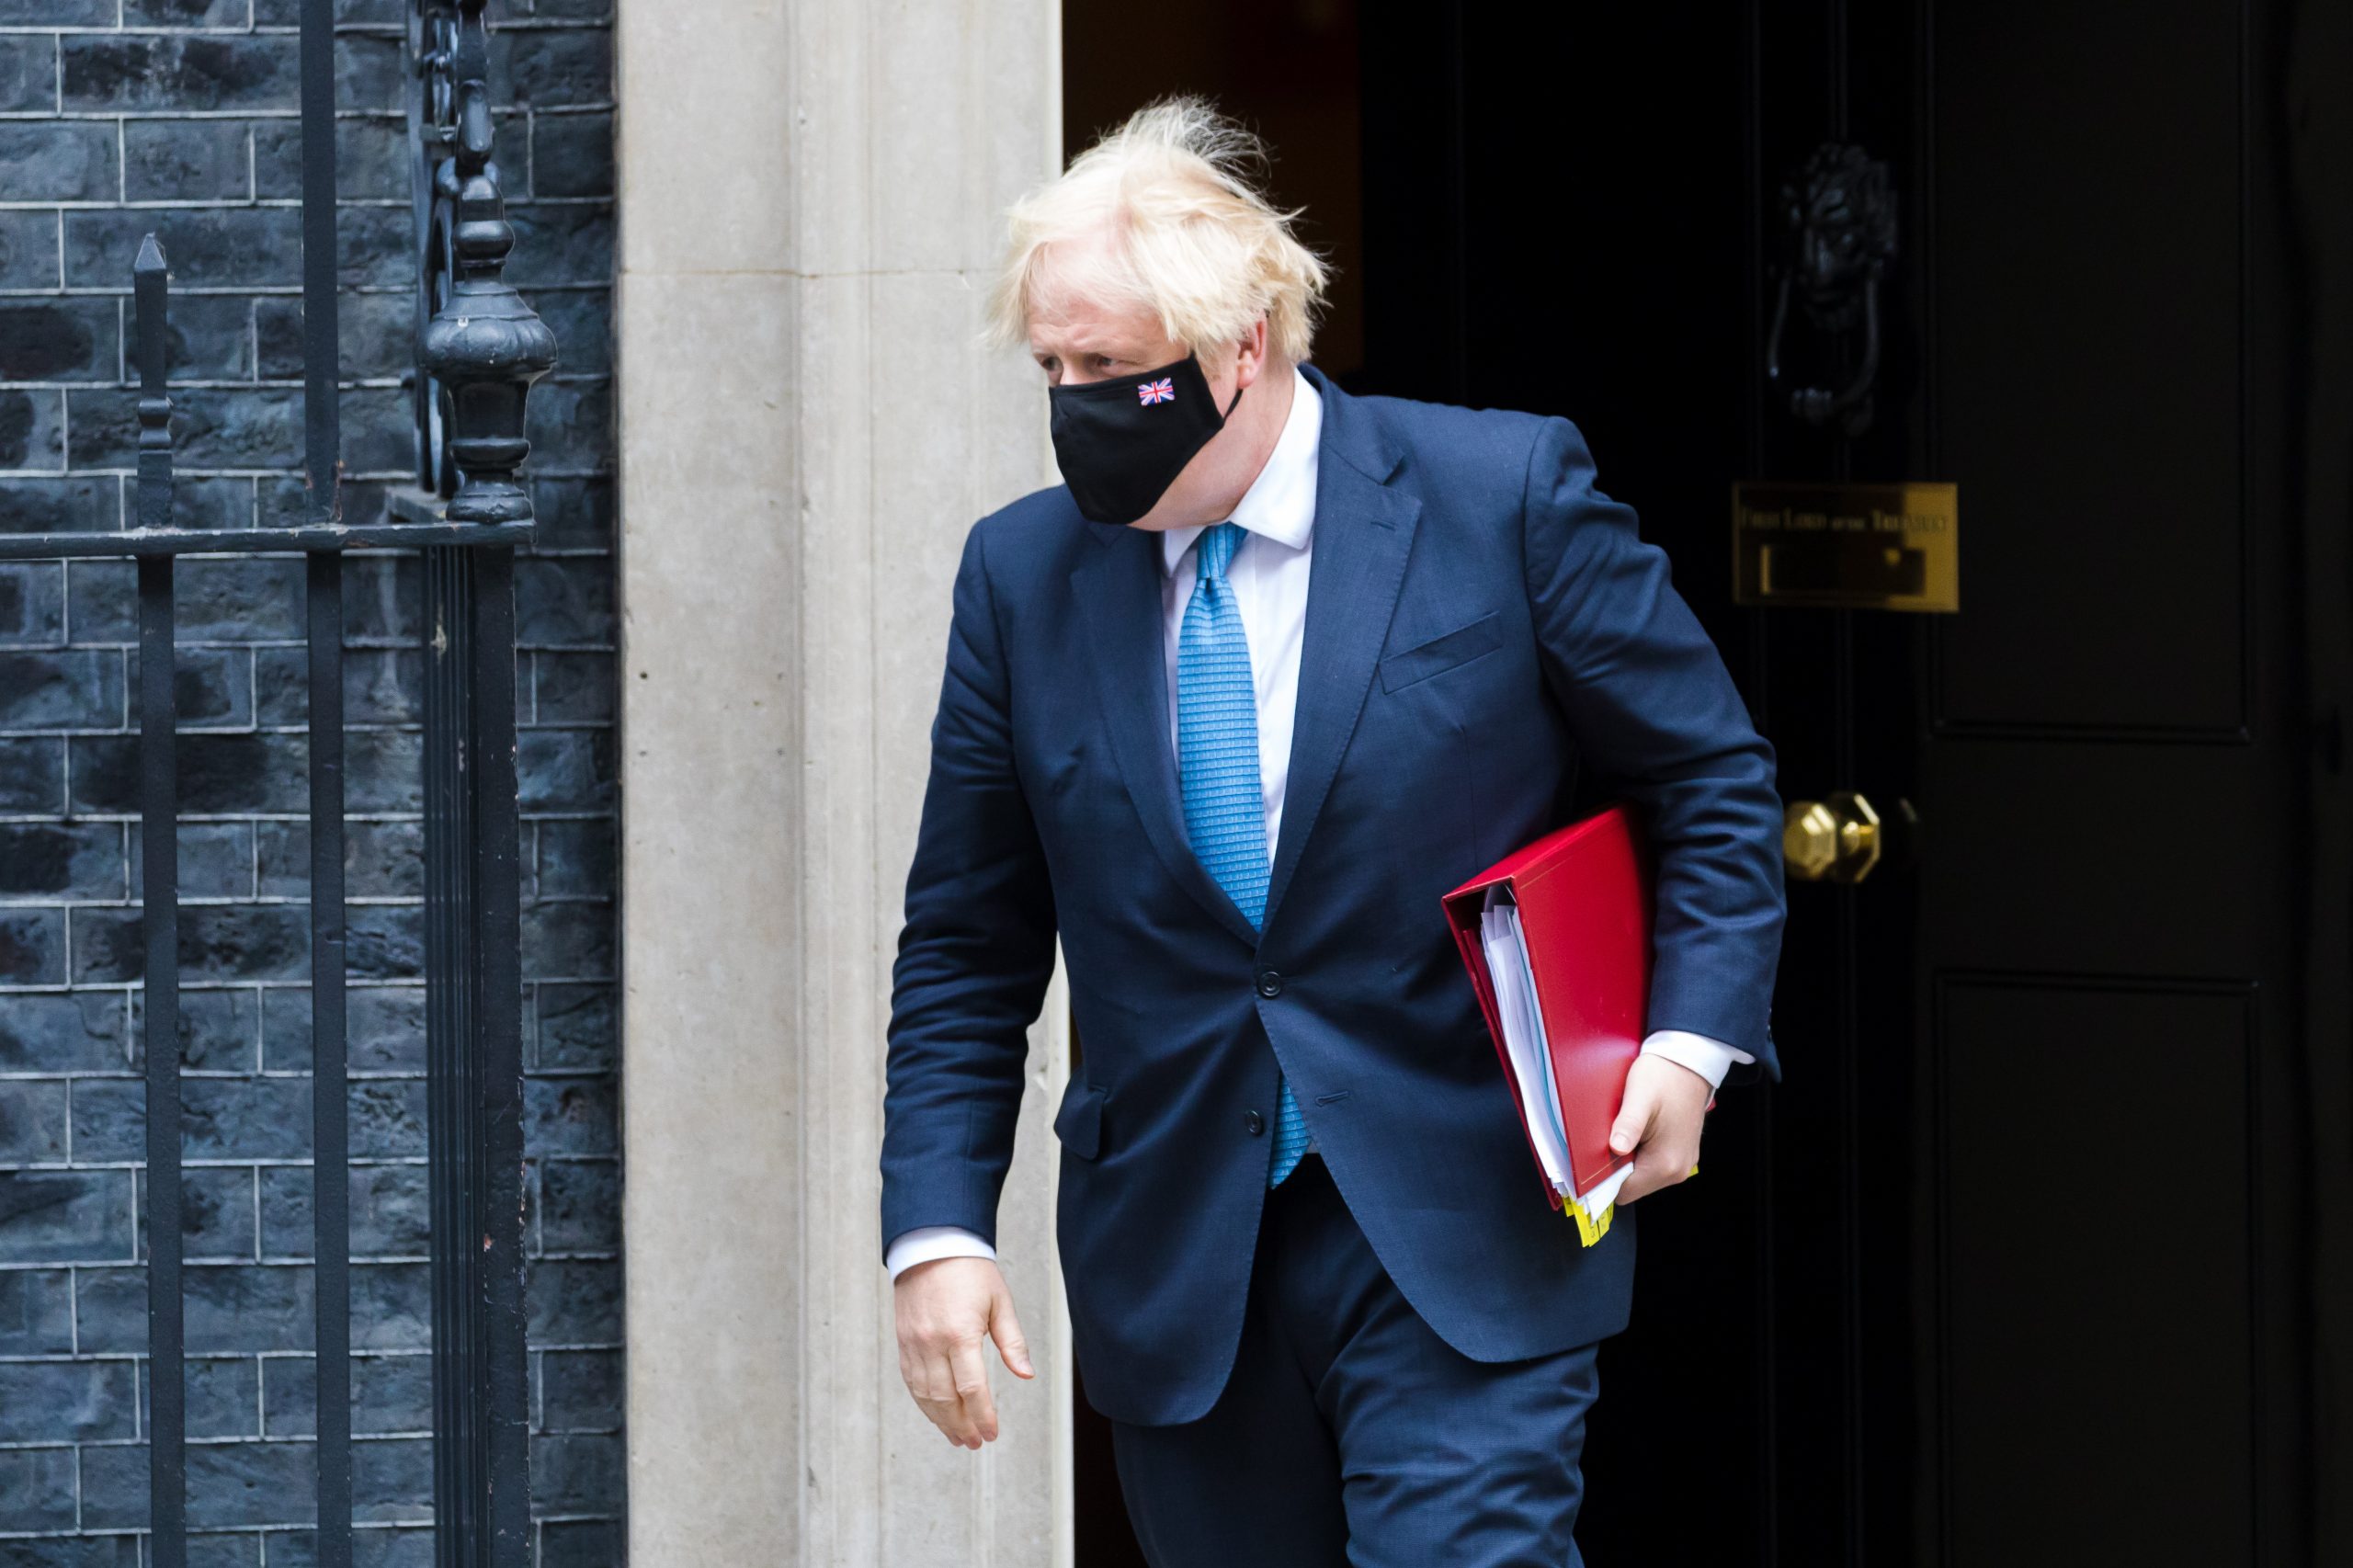 epa09343728 British Prime Minister Boris Johnson departs 10 Downing Street for Prime Minister Questions at parliament in London, Britain, 14 July 2021. Johnson faces the MPs' weekly question time in the House of Commons.  EPA/VICKIE FLORES